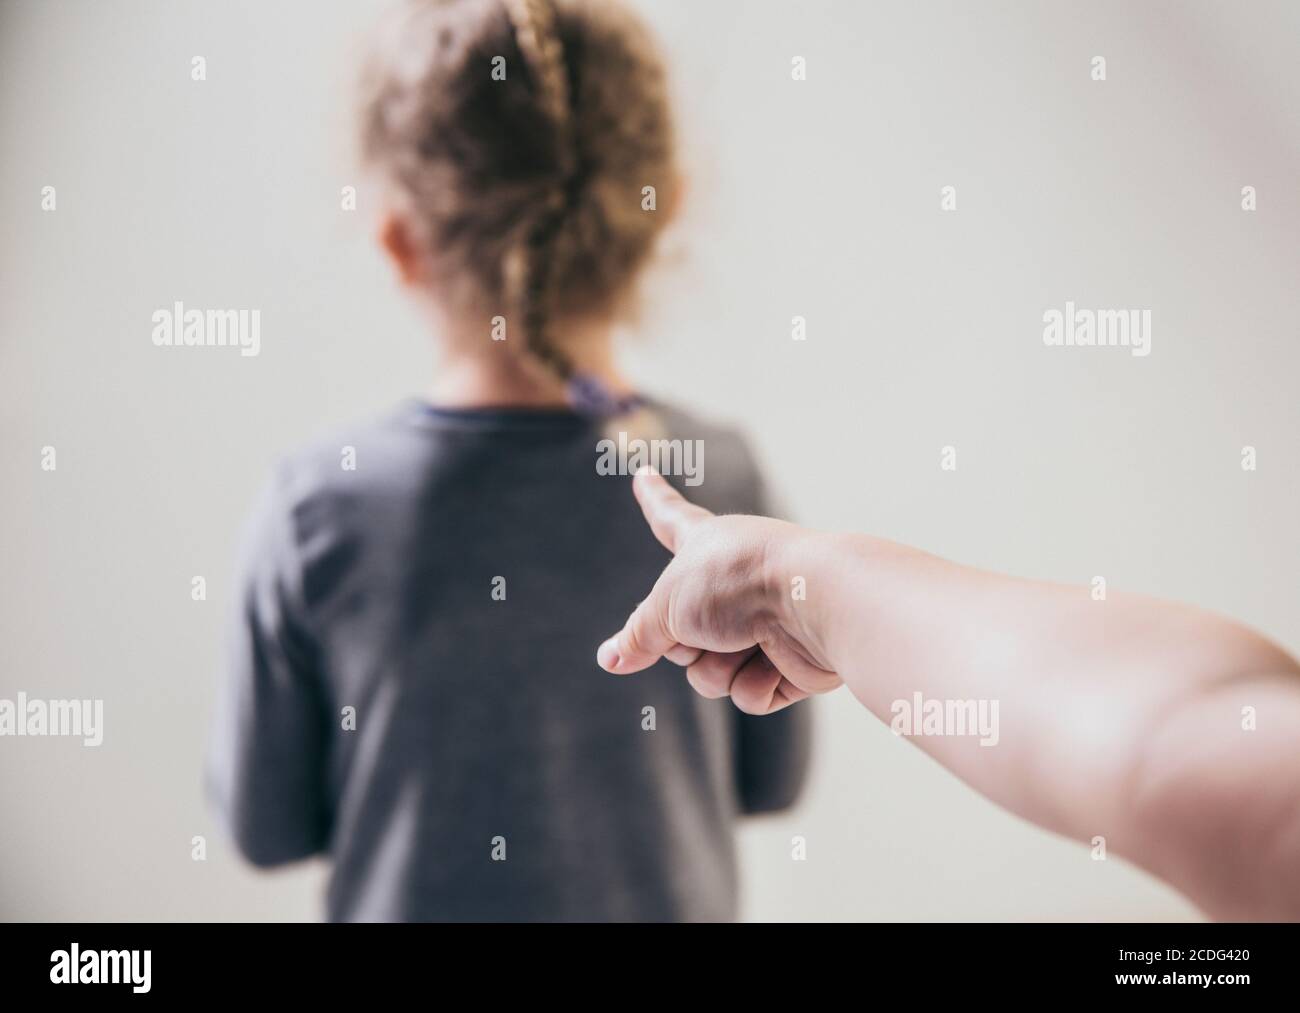 Child bully pointing finger at blurred unrecognizable victim and talking behind back. Bullying concept. Stock Photo